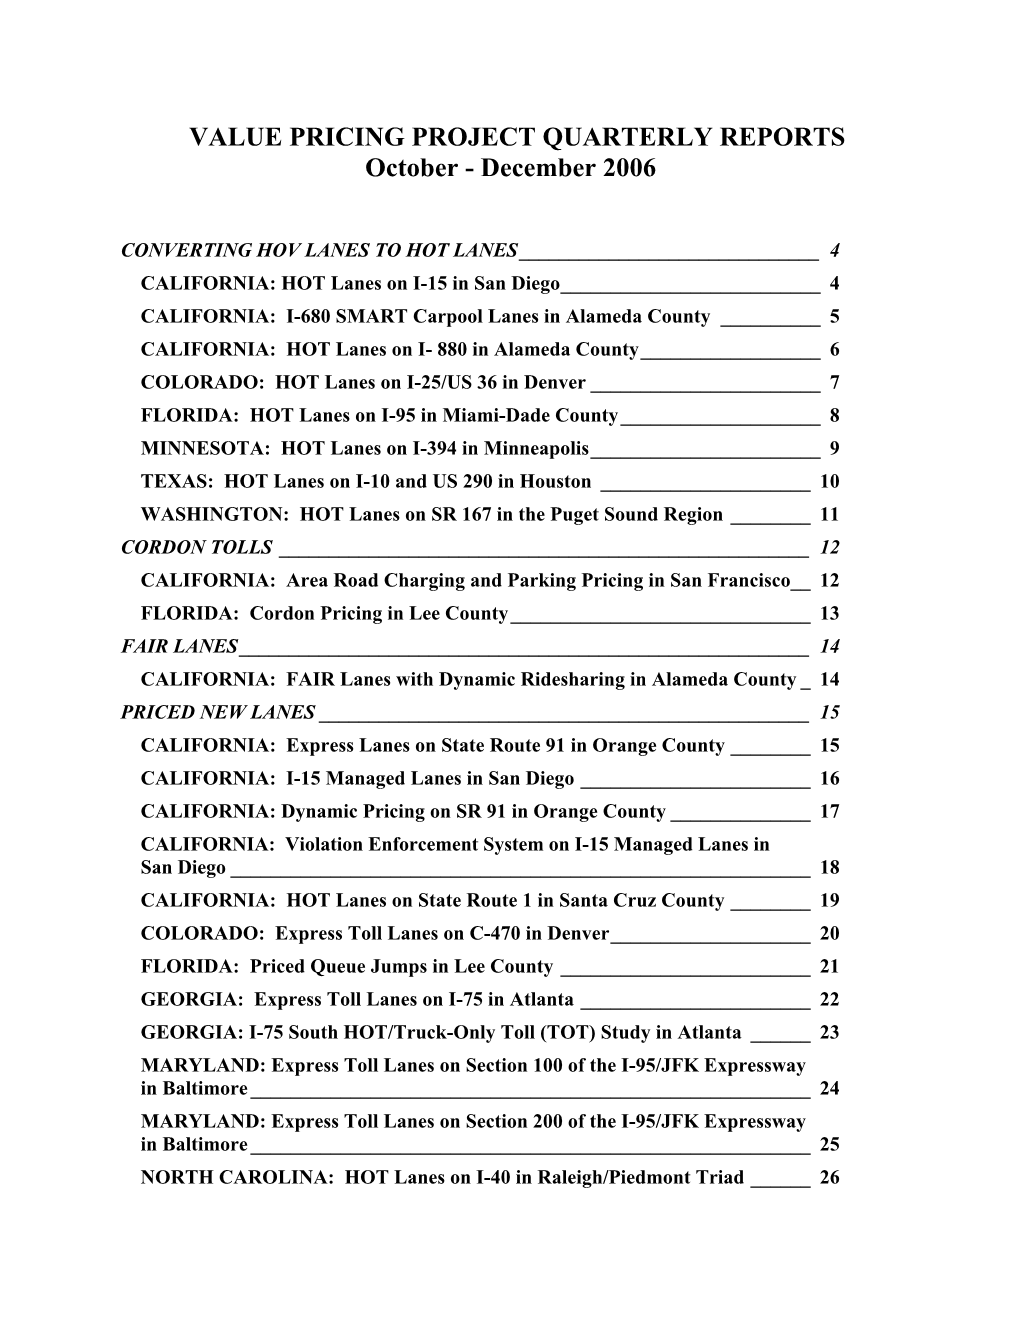 VALUE PRICING PROJECT QUARTERLY REPORTS October - December 2006